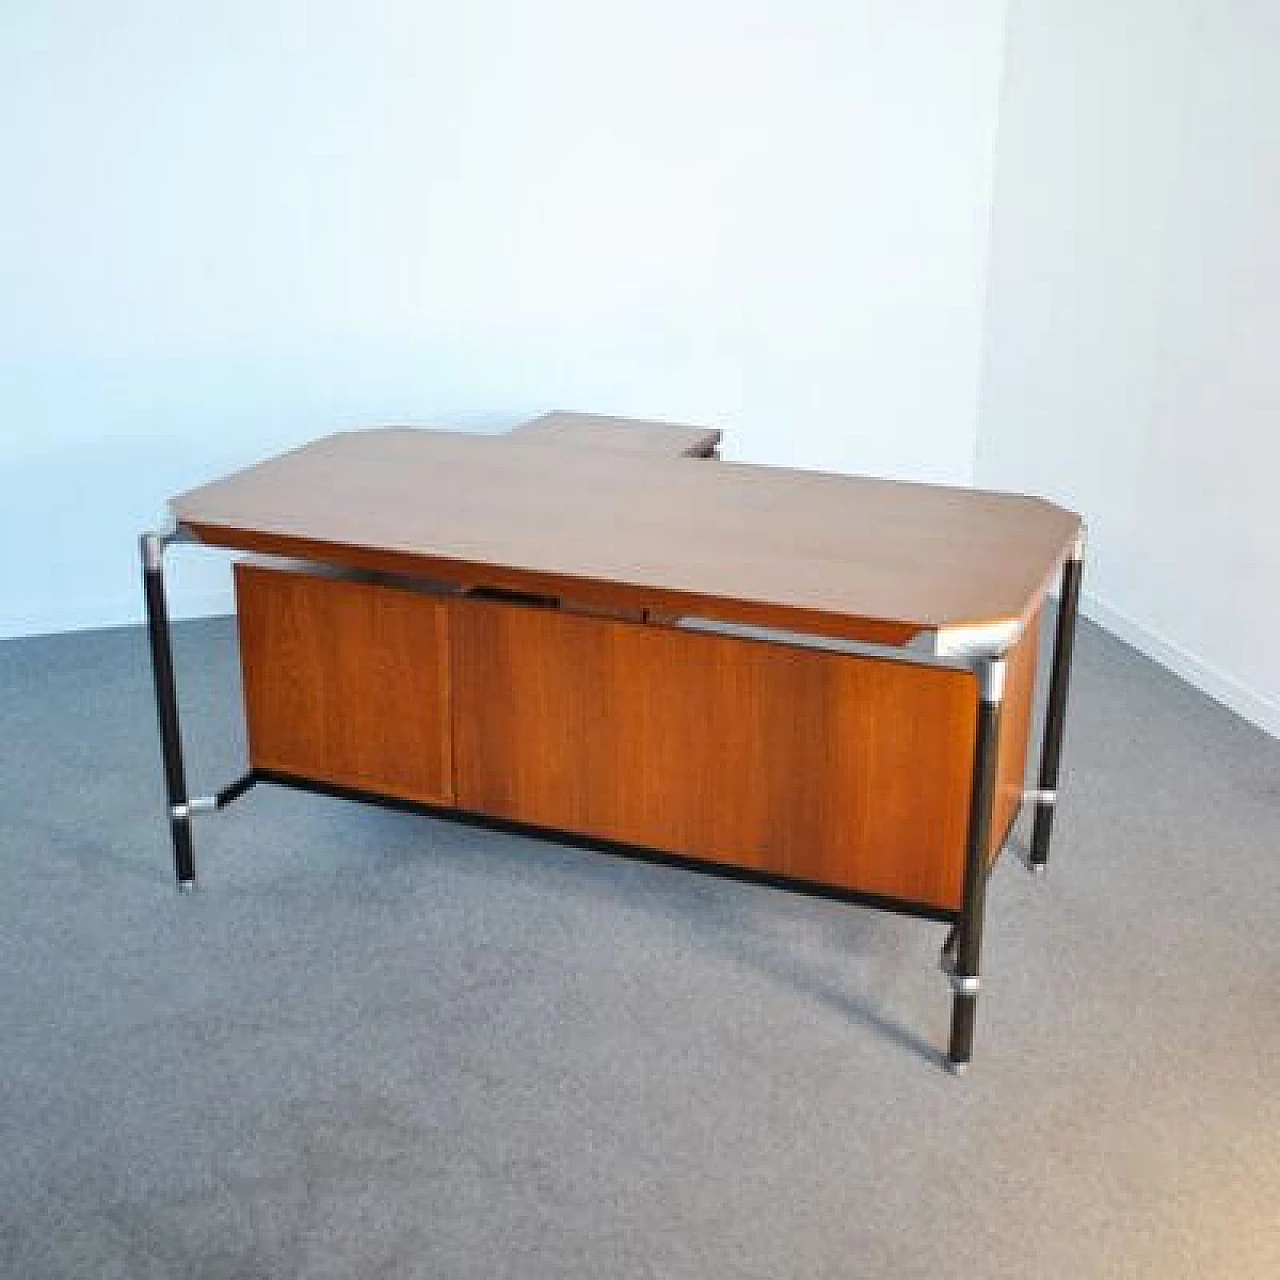 Executive desk by Ico Parisi for MIM Rome, 1950s 1412238